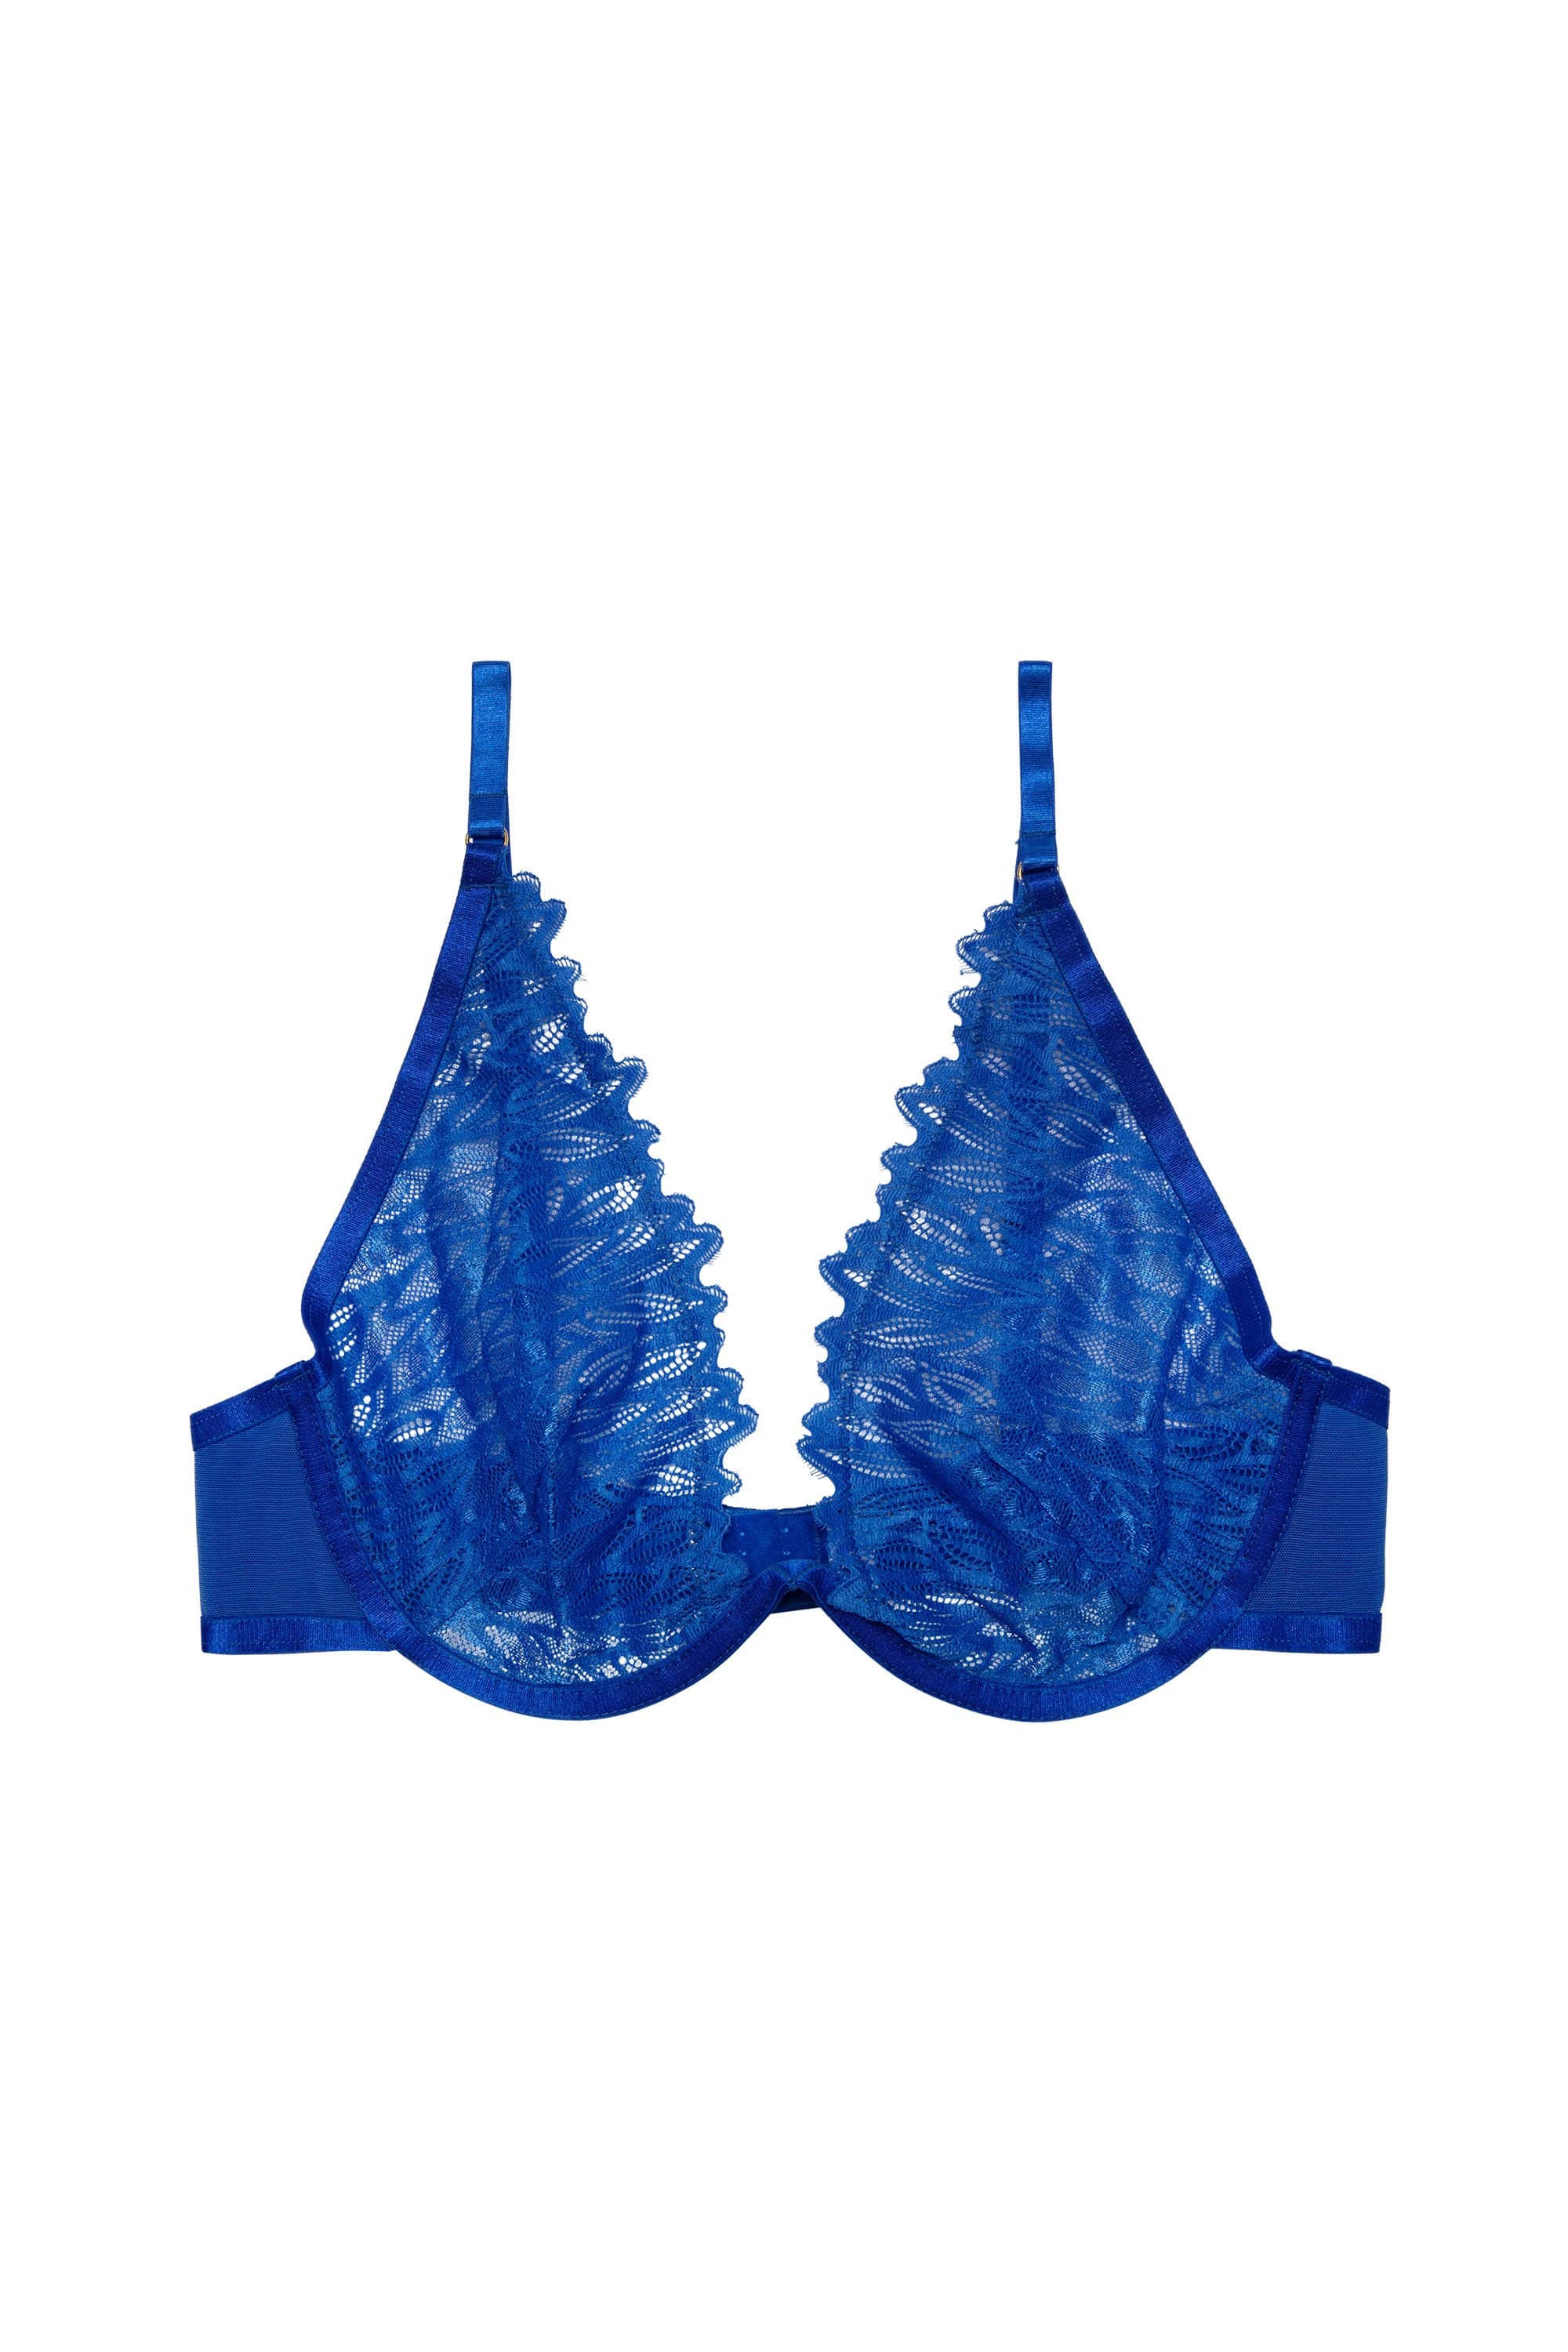 Margot Cobalt High Apex With Wire Lace Bra – Playful Promises USA